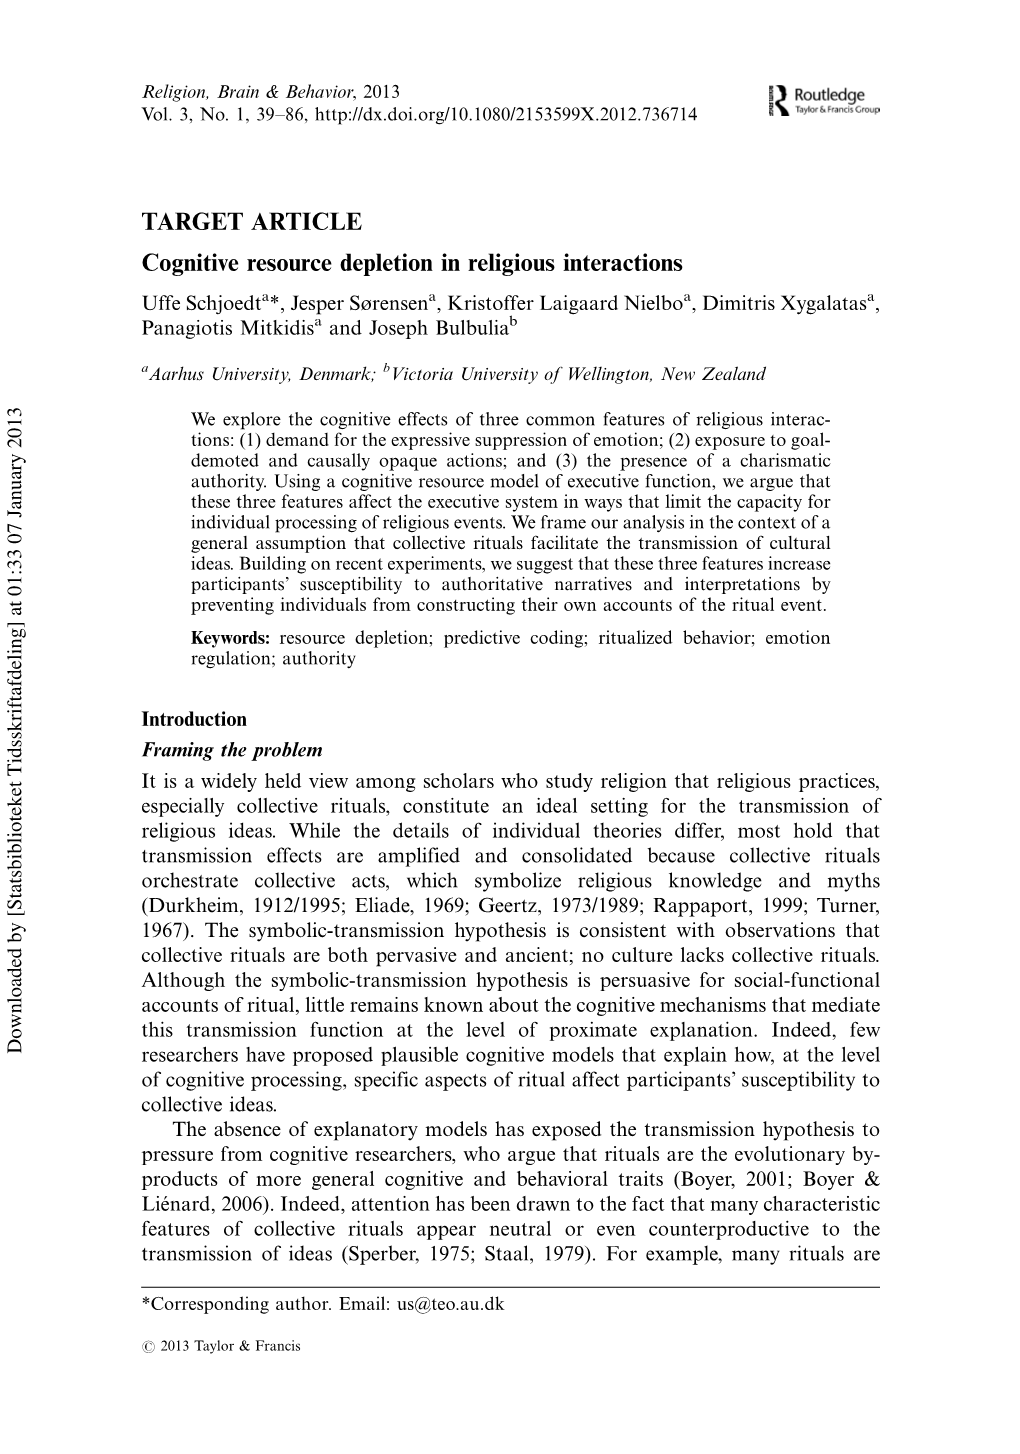 Cognitive Resource Depletion in Religious Interactions